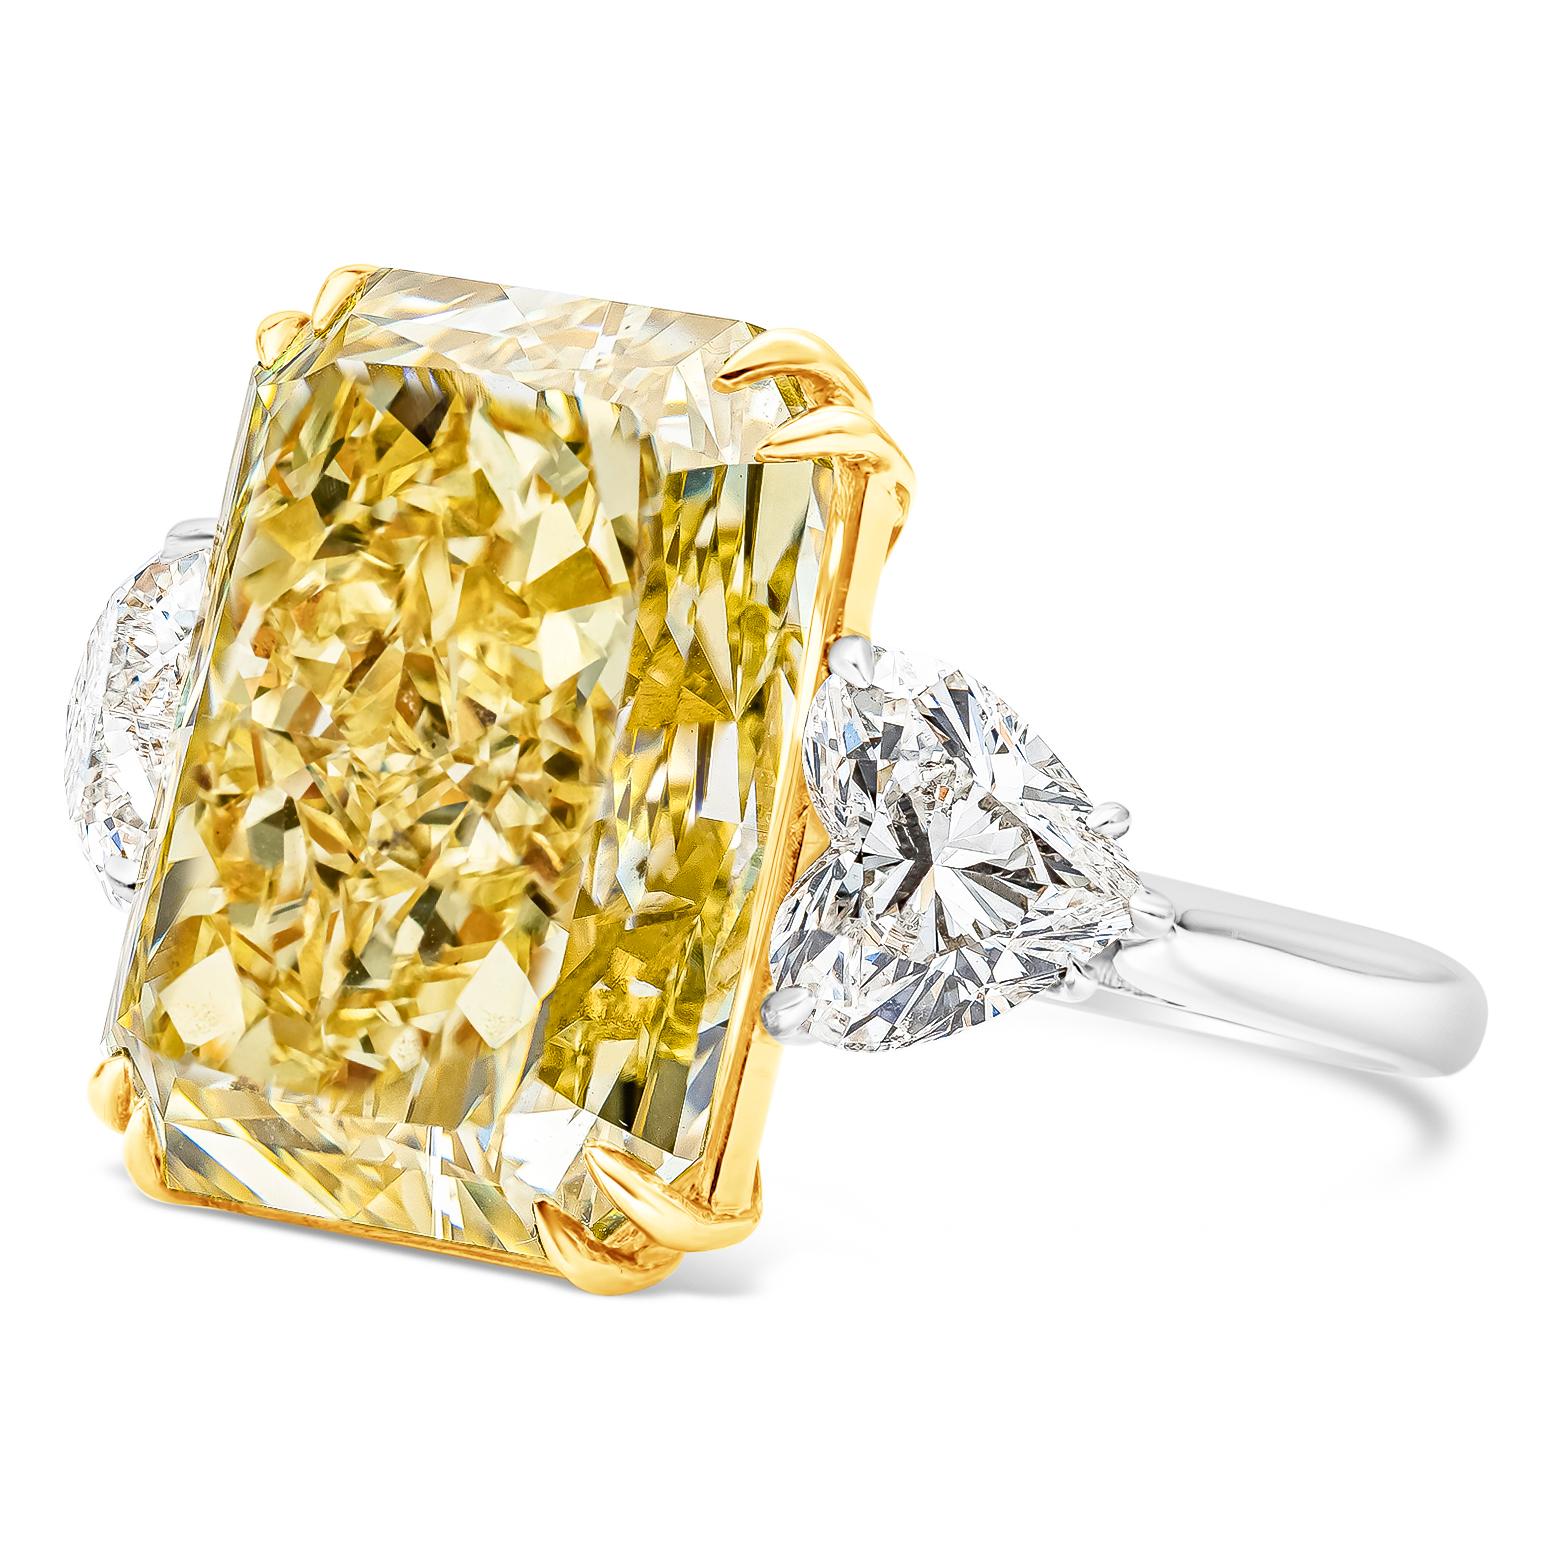 Rare and color rich three-stone engagement ring, featuring a vibrant 17.25 carat elongated radiant cut diamond certified by GIA as Fancy Intense Yellow color and VS2 clarity, set in an eight prong 18K yellow gold basket. Flanking the center stone